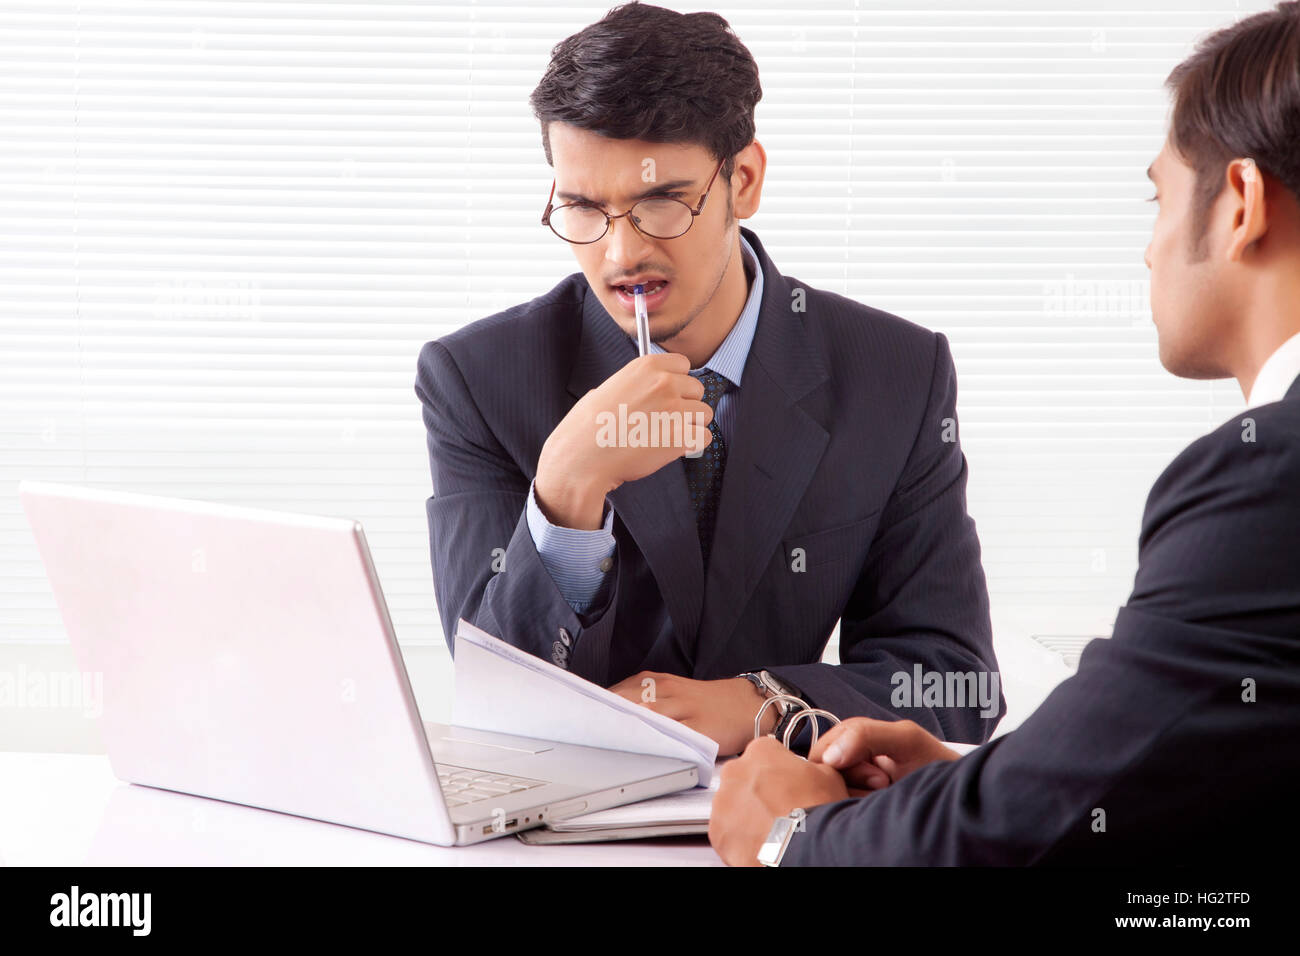 Young professional man in deep thought holding pen between his teeth looking at laptop computer while discussing work with another professional man Stock Photo